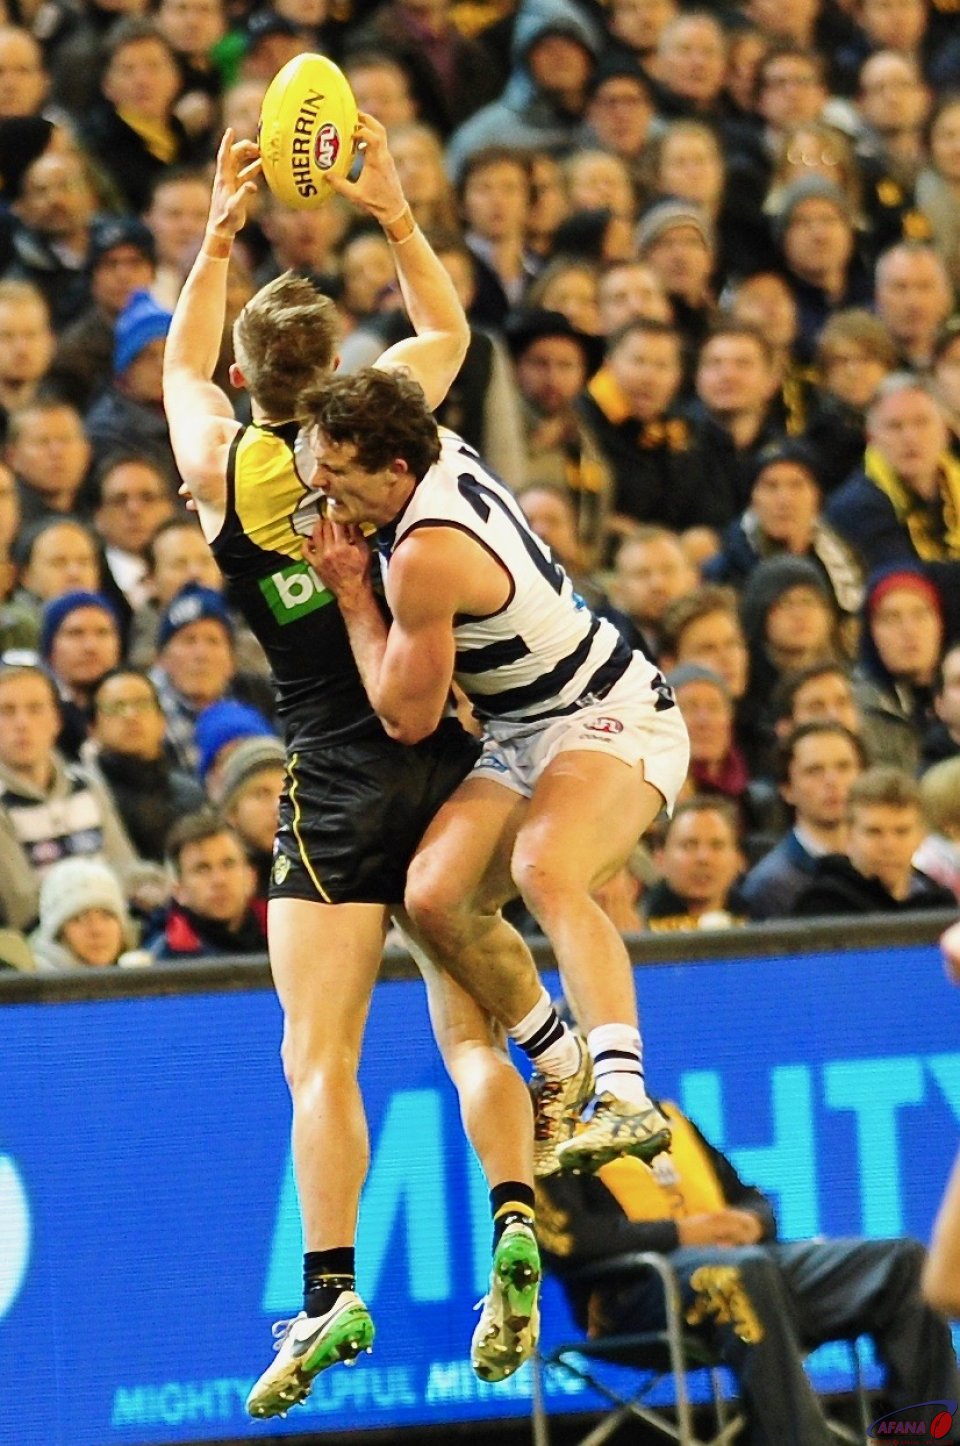 Reiwoldt marks in front of Jed Bews